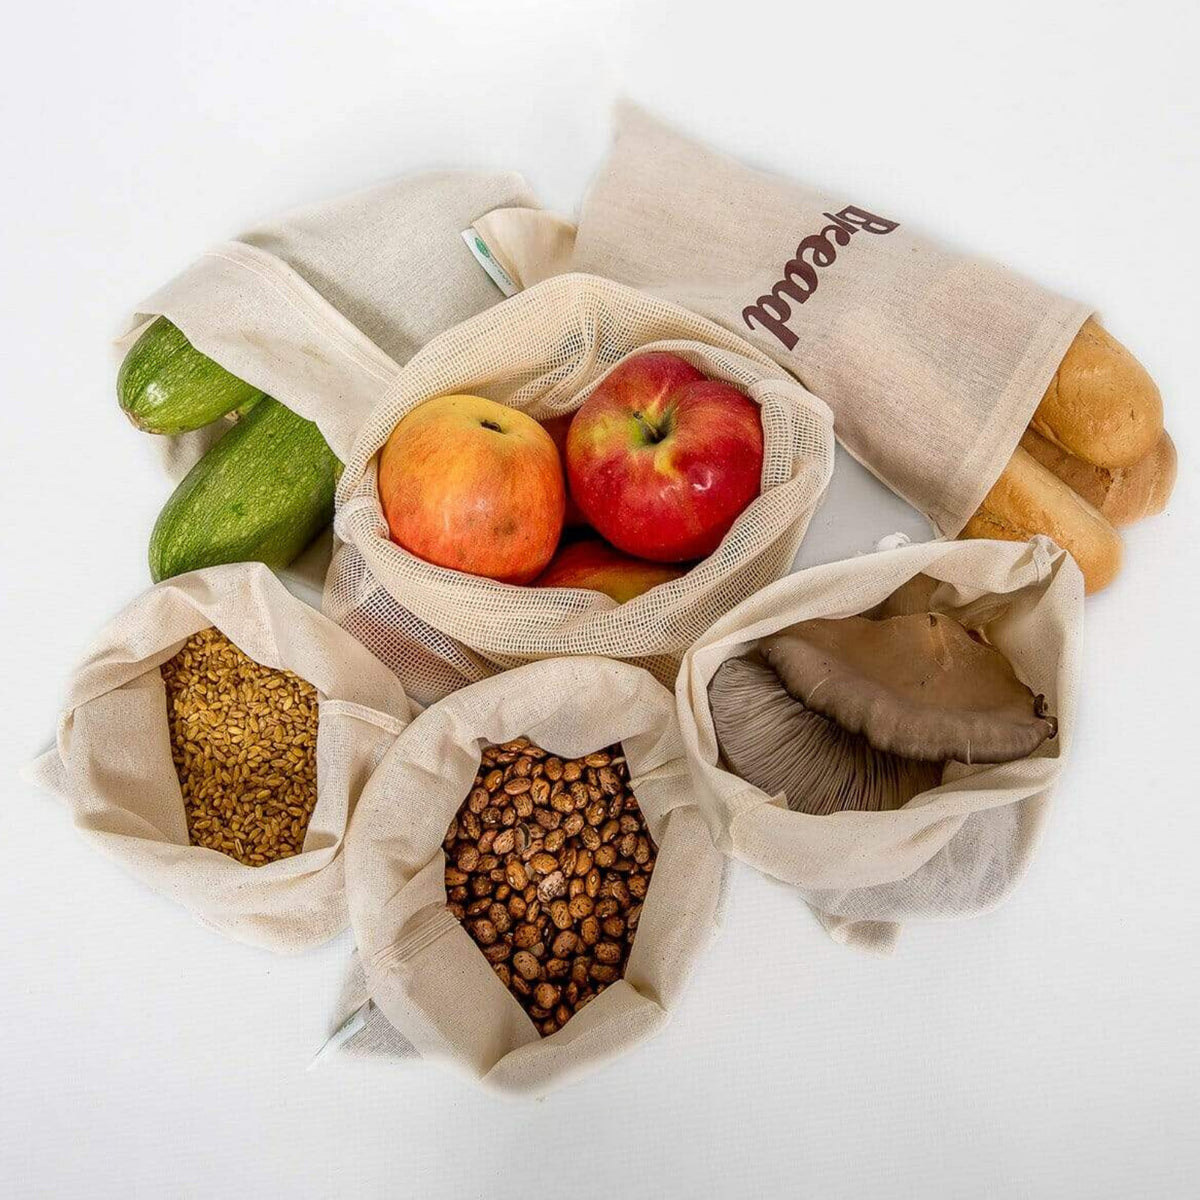 Pack of 5 Natural Cotton Mesh Drawstring Bags. Eco- Friendly Fruit